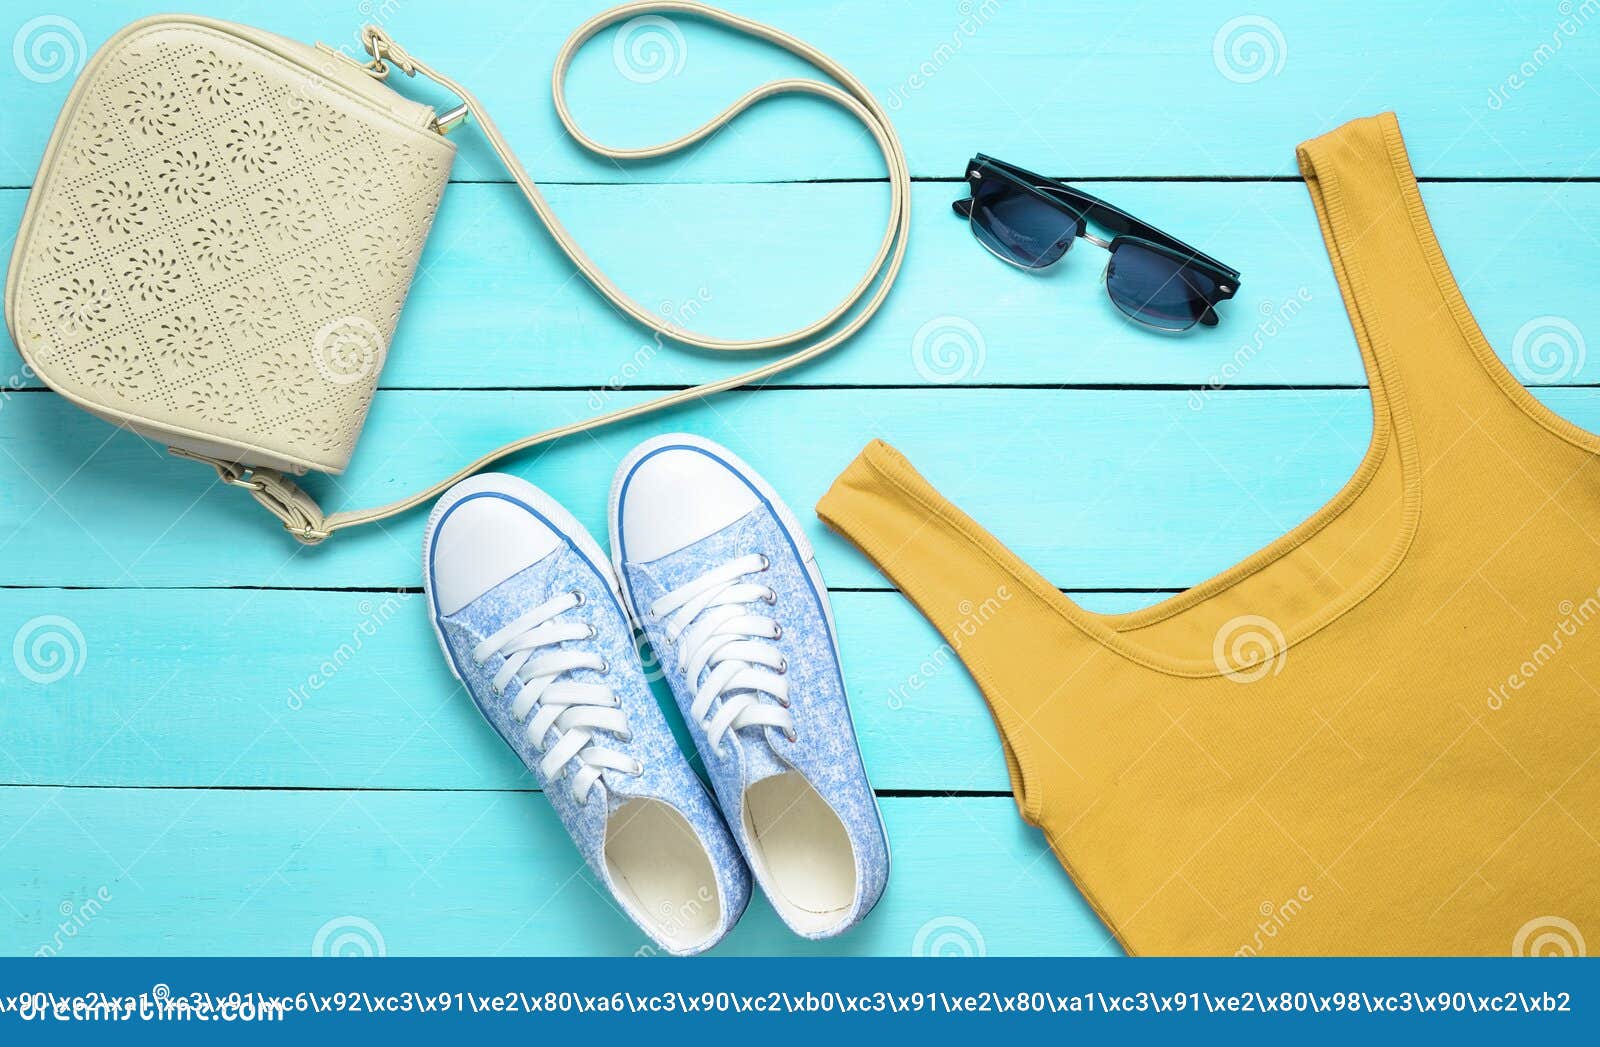 Woman s clothing top view stock photo. Image of clothing - 131441560